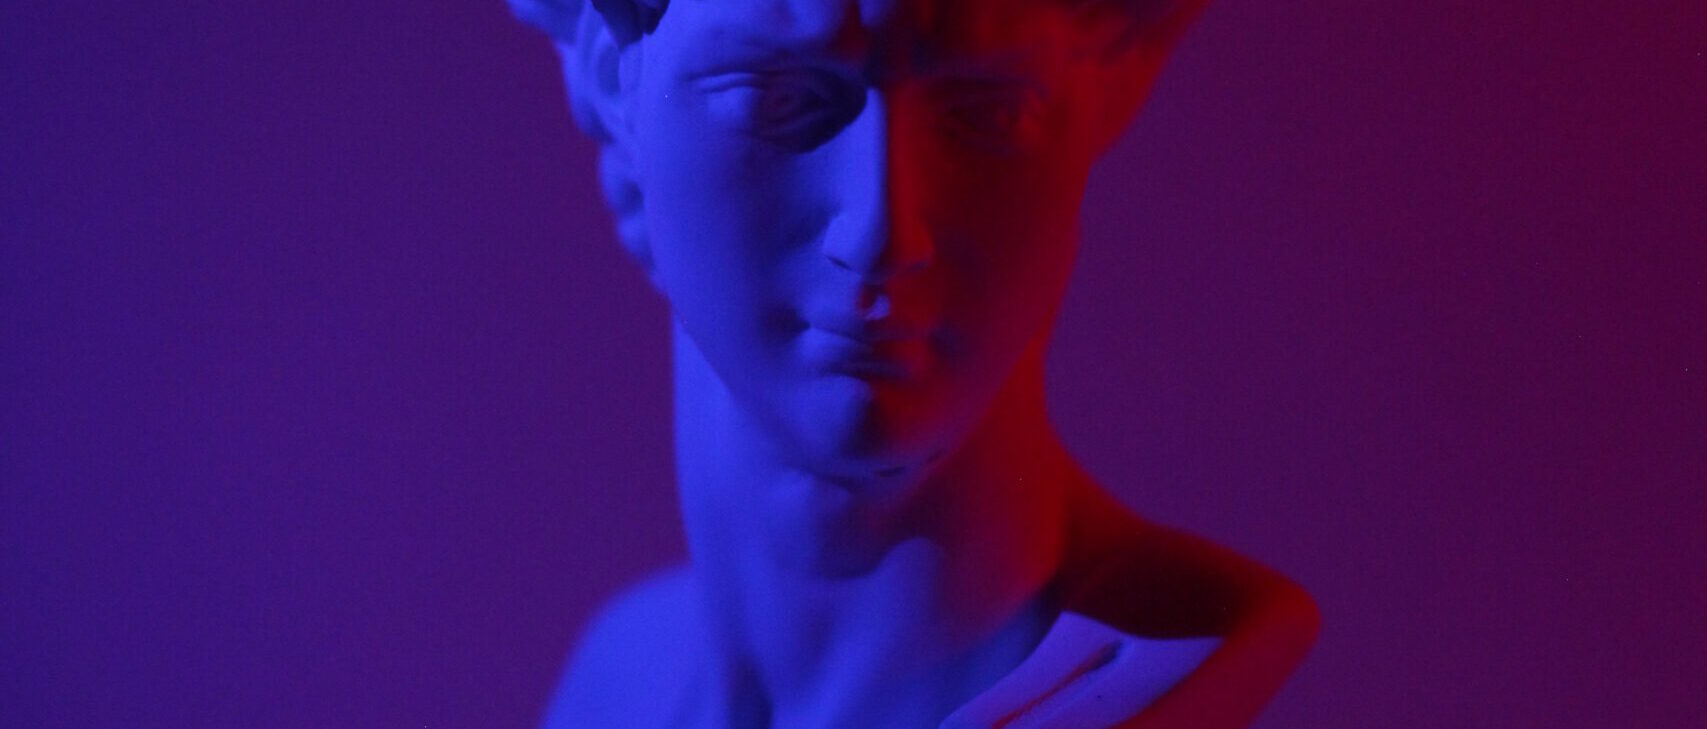 Bust of young male on plinth placed on white surface in dark studio in blue and red lights